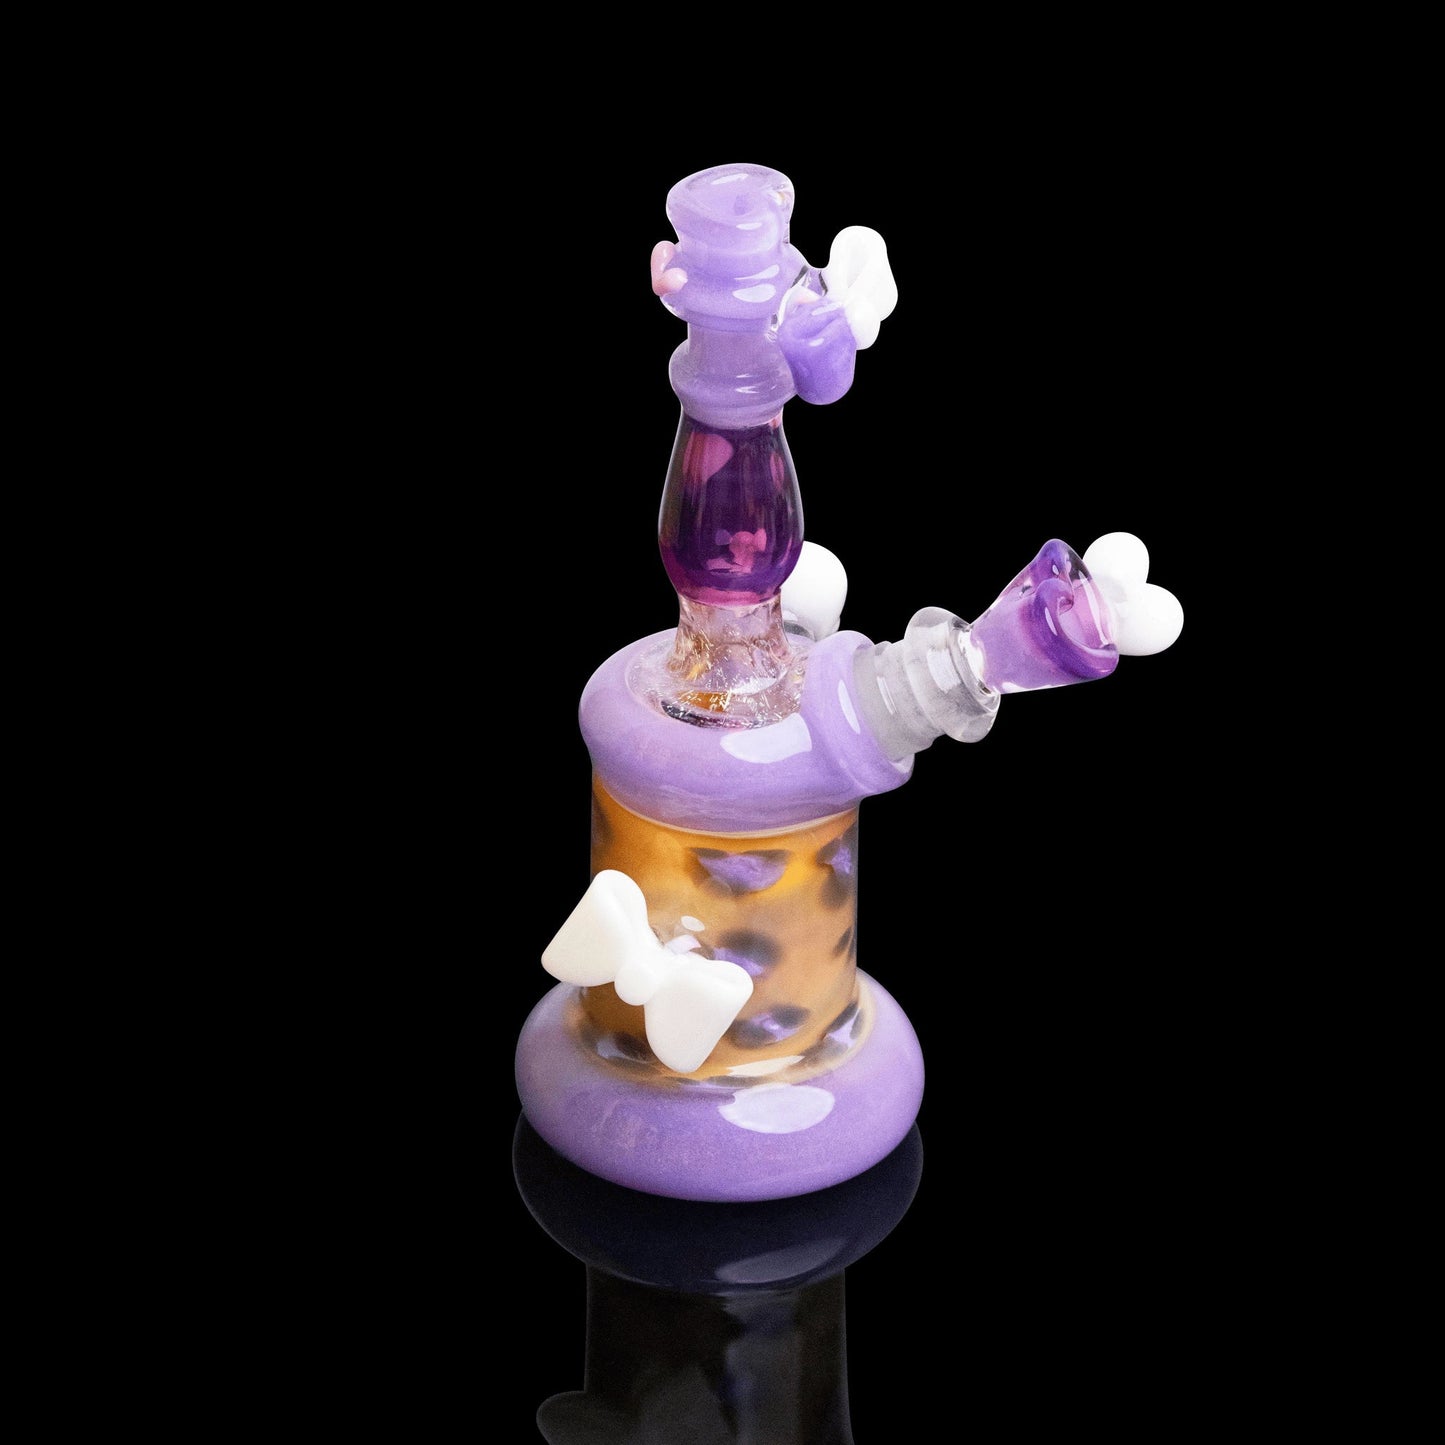 artisan-crafted art piece - Mini Fully Worked Tube (C) by Sakibomb (2022 Drop)